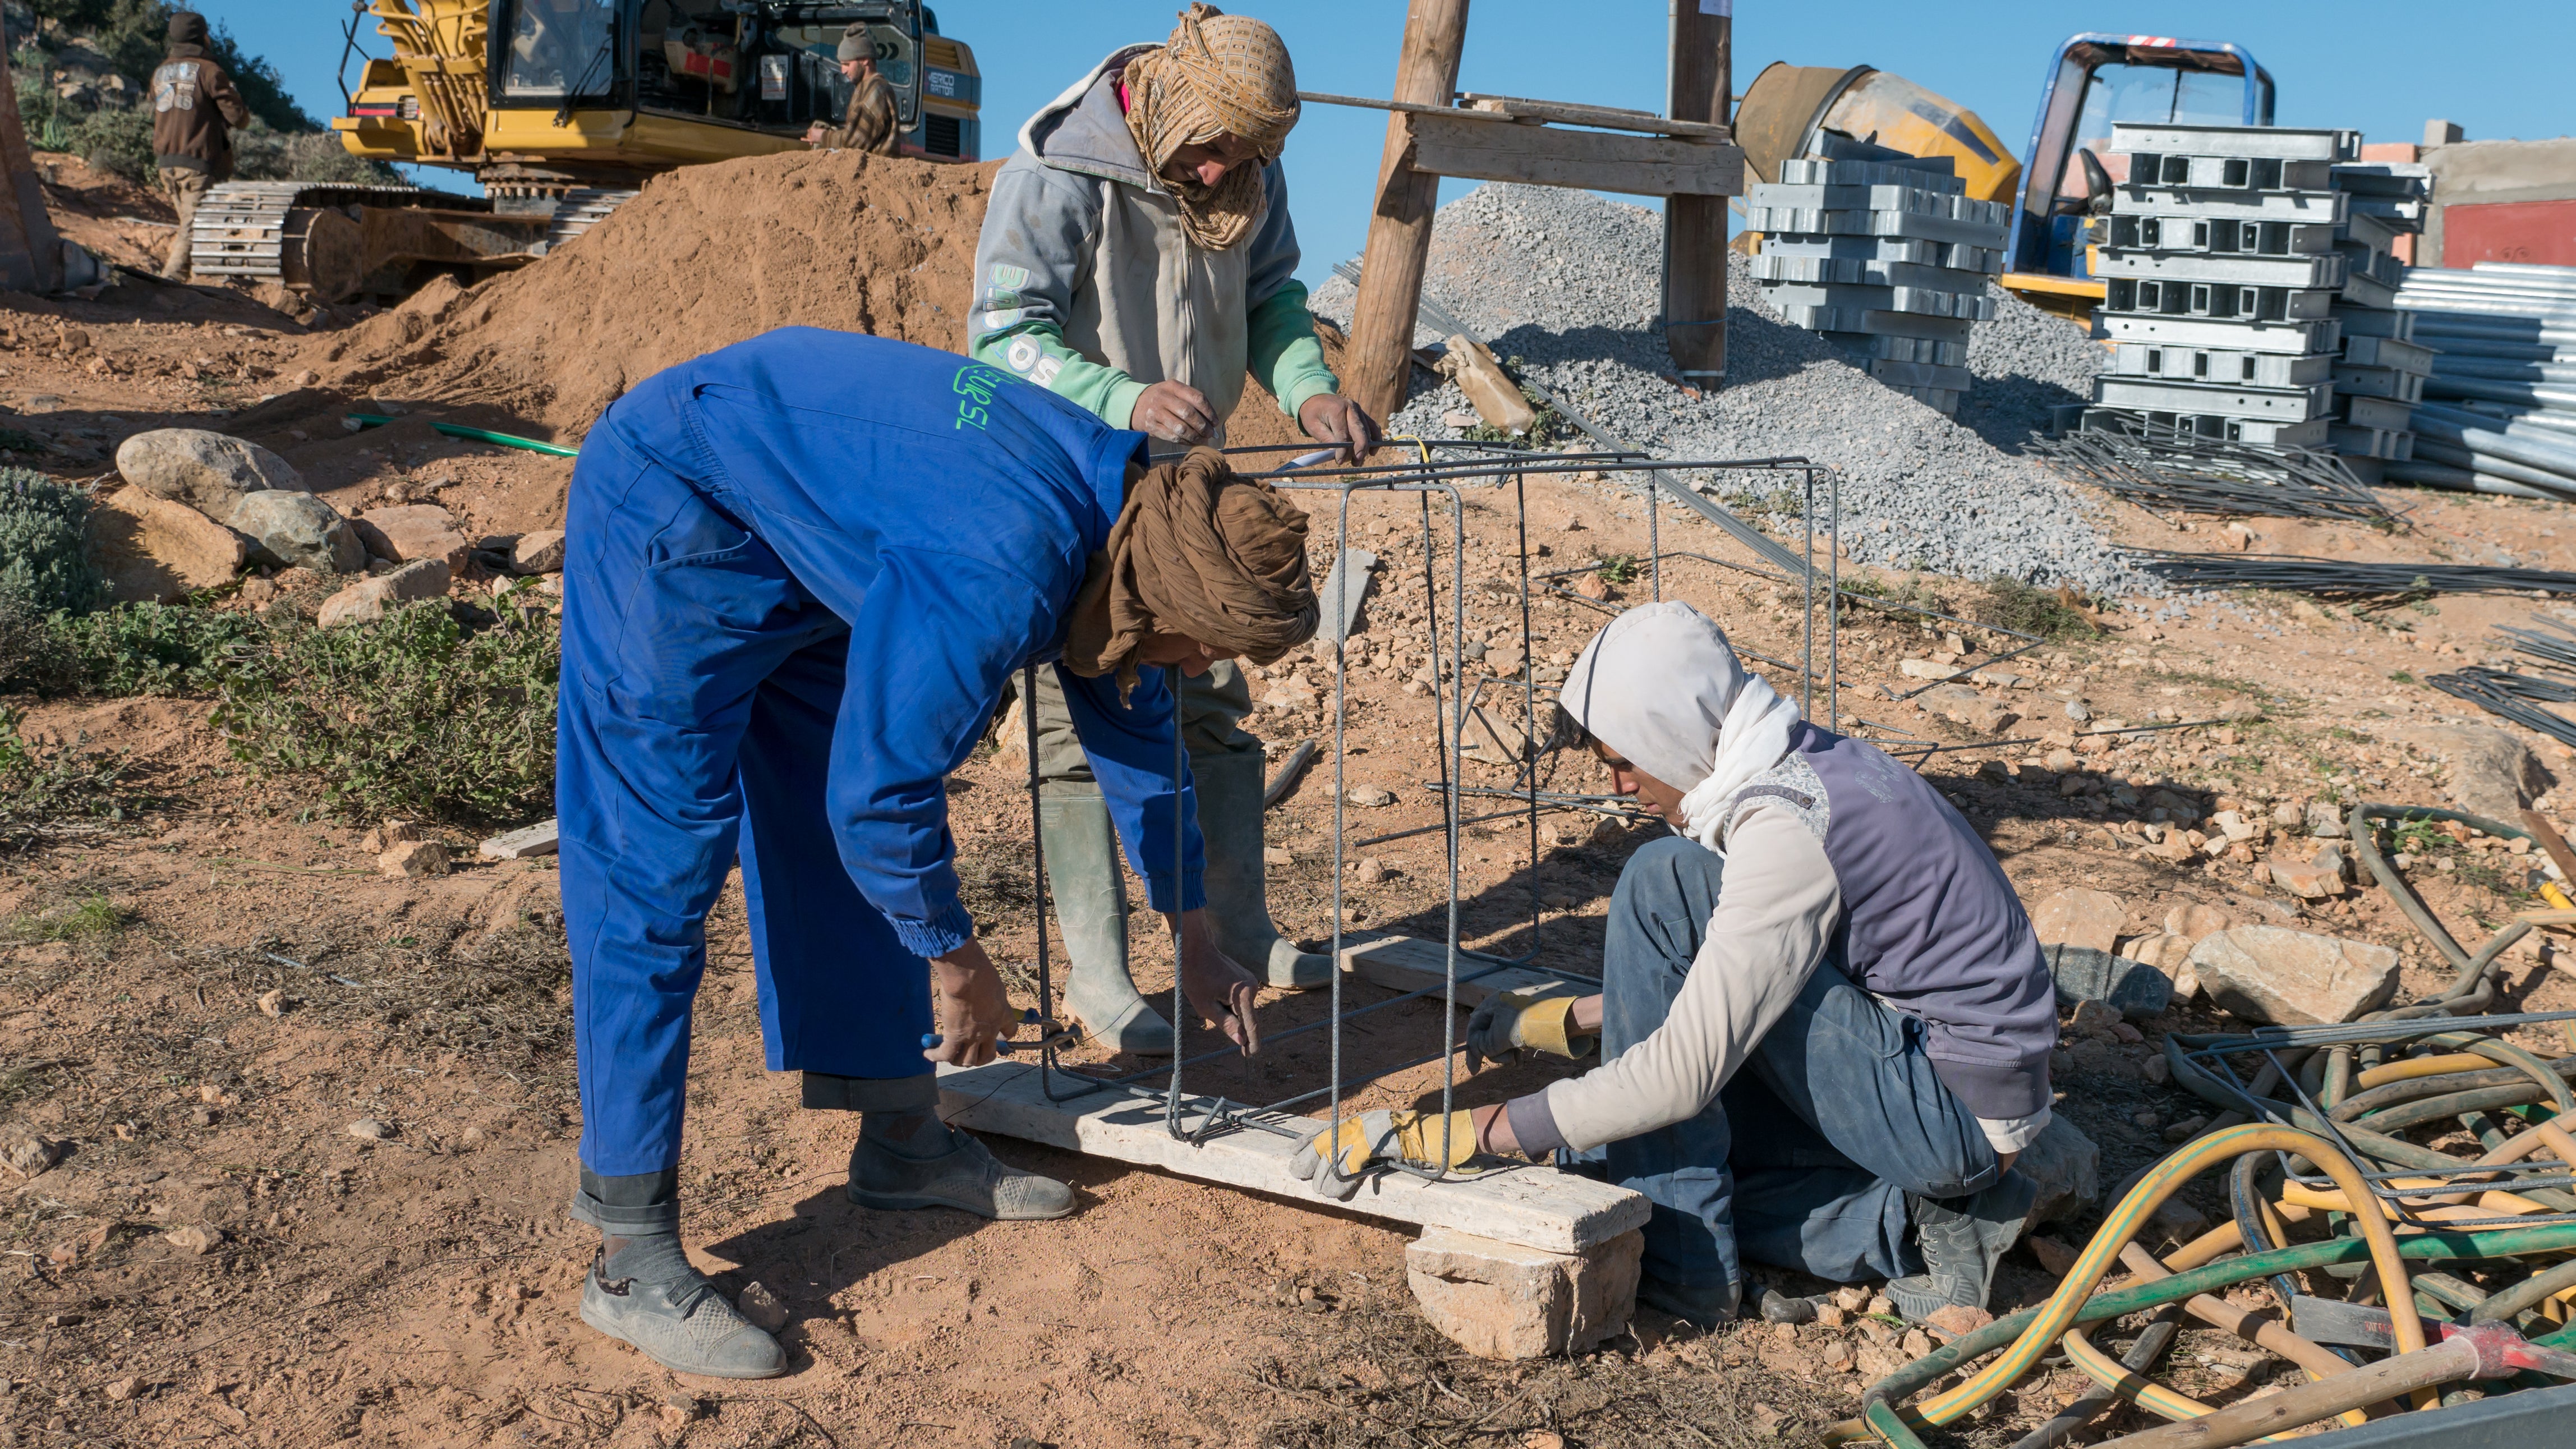 5/17:The fog collectors need strong foundations to withstand the gusty winds of up to 120 km/h. Handmade wire baskets ensure that the concrete foundations are firmly anchored.